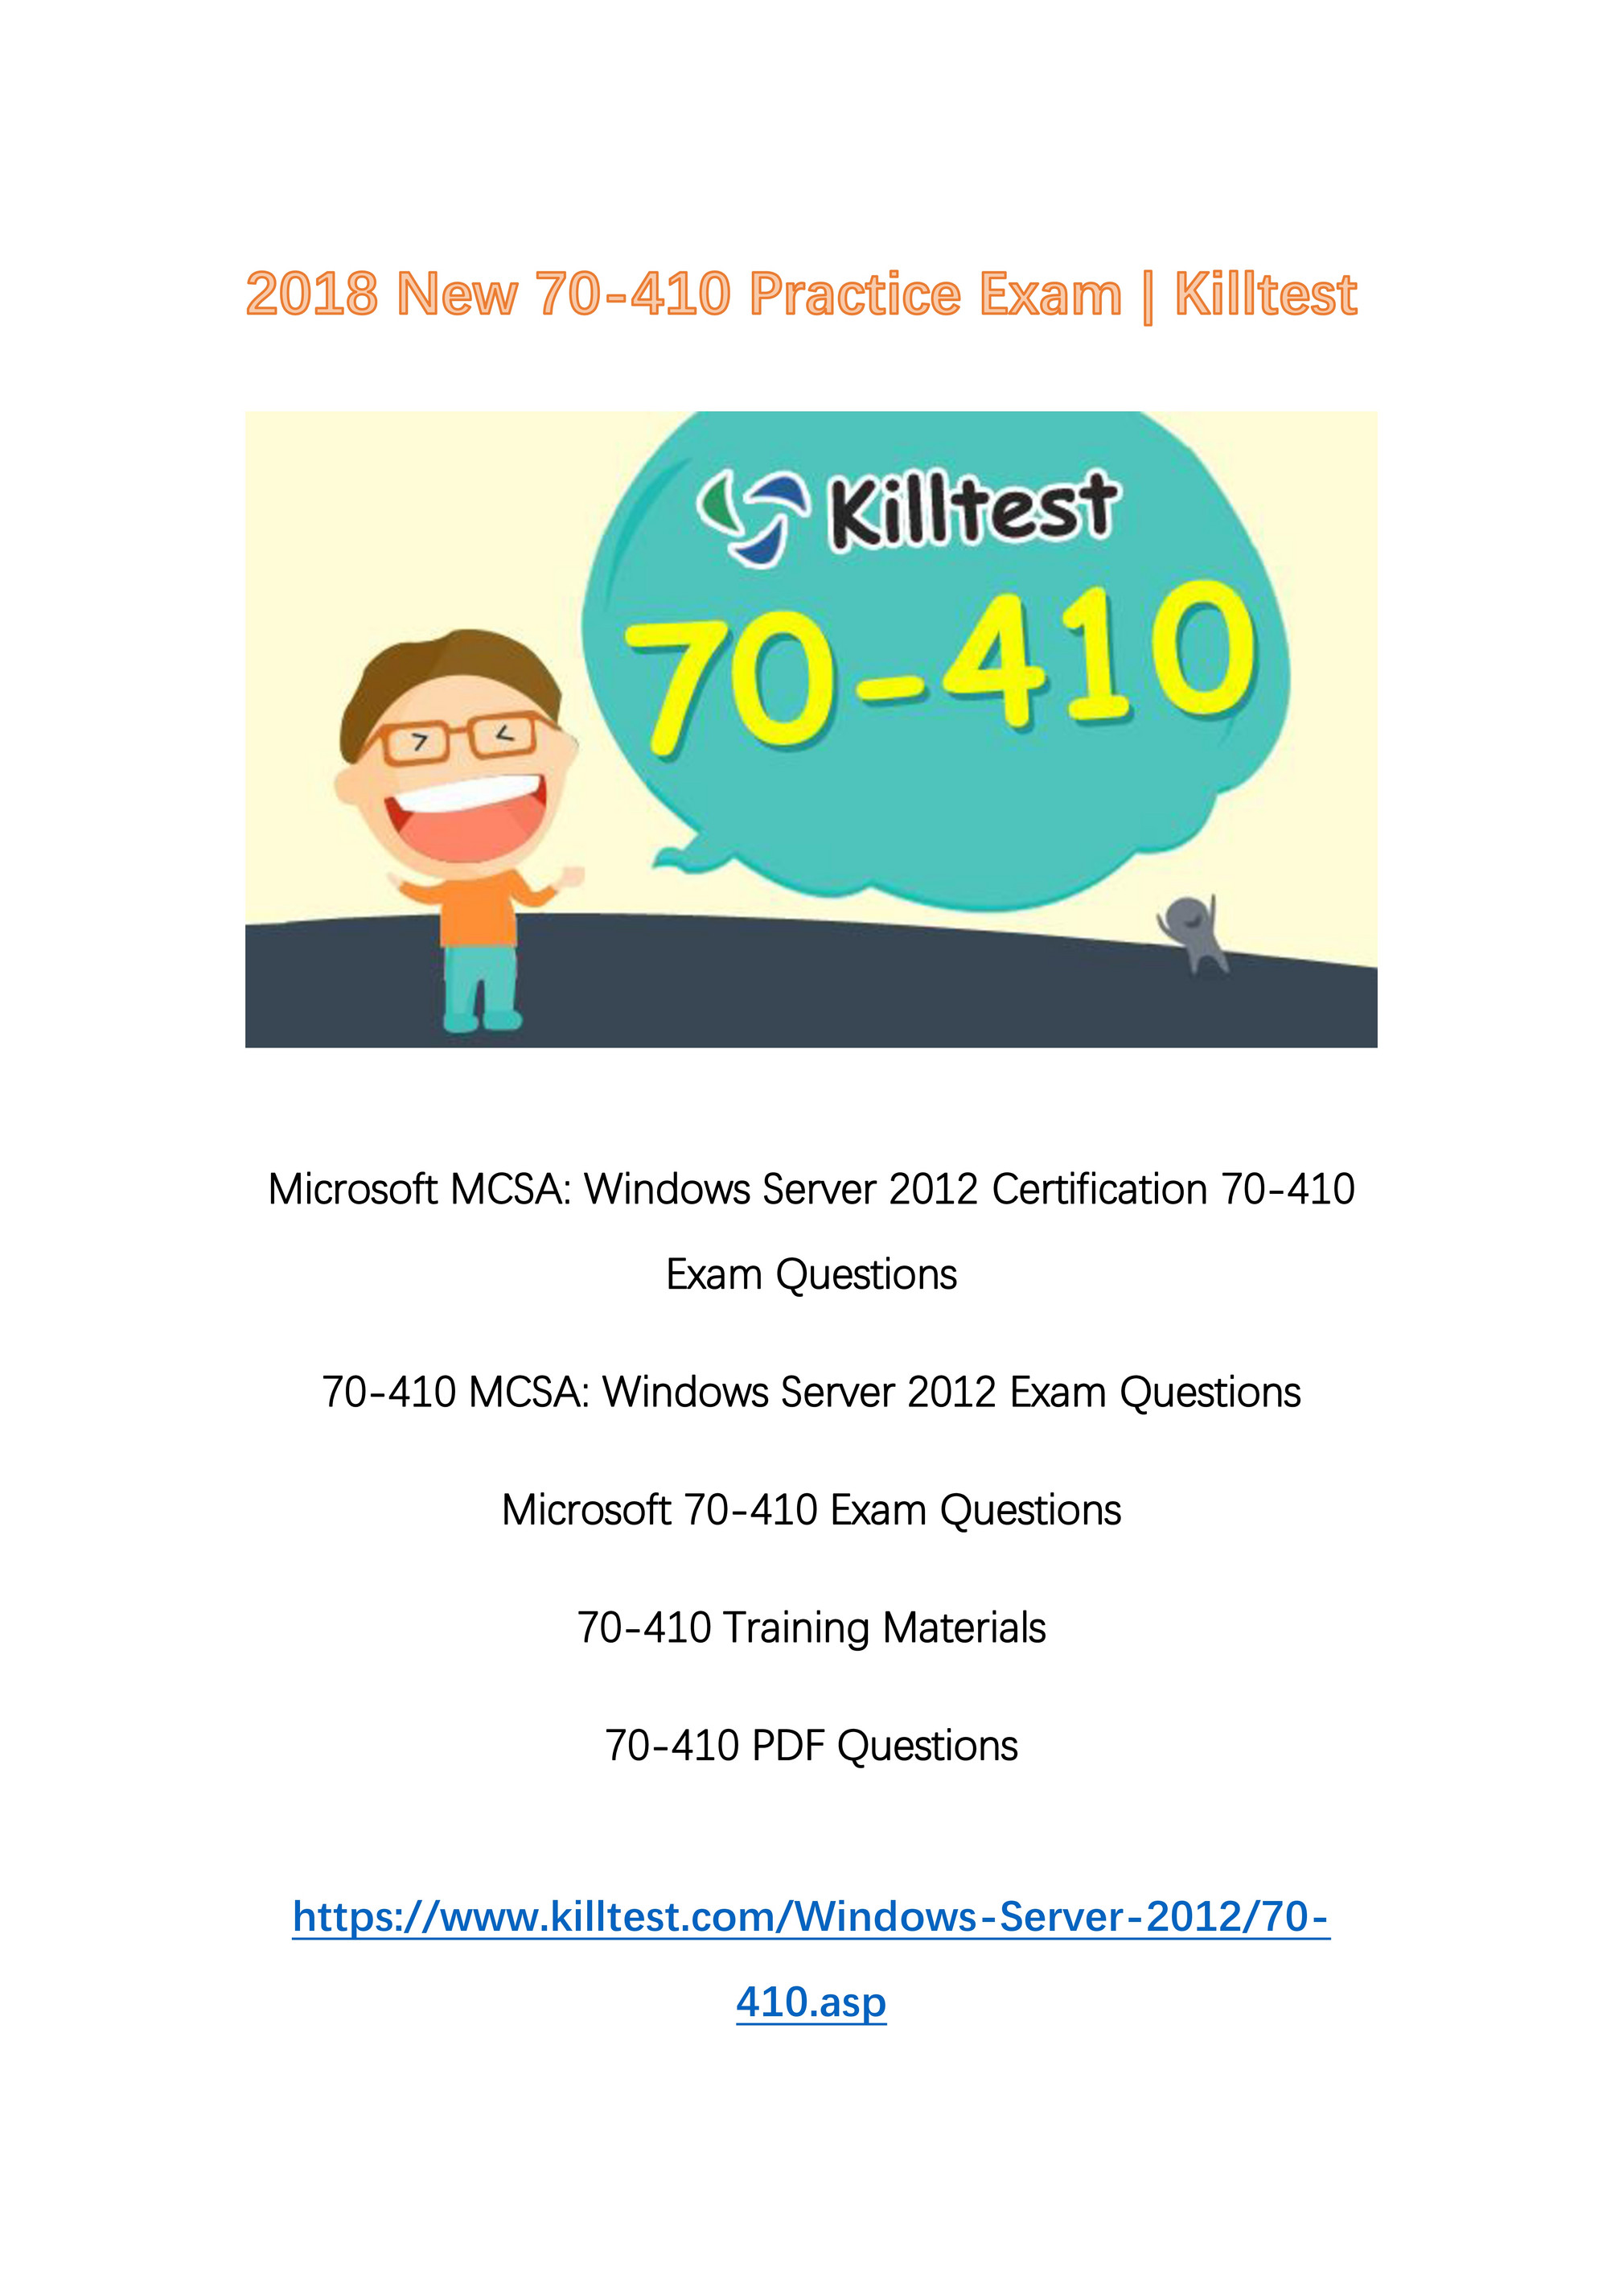 Killtest 18 New 70 410 Exam Questions Killtest Page 6 Created With Publitas Com